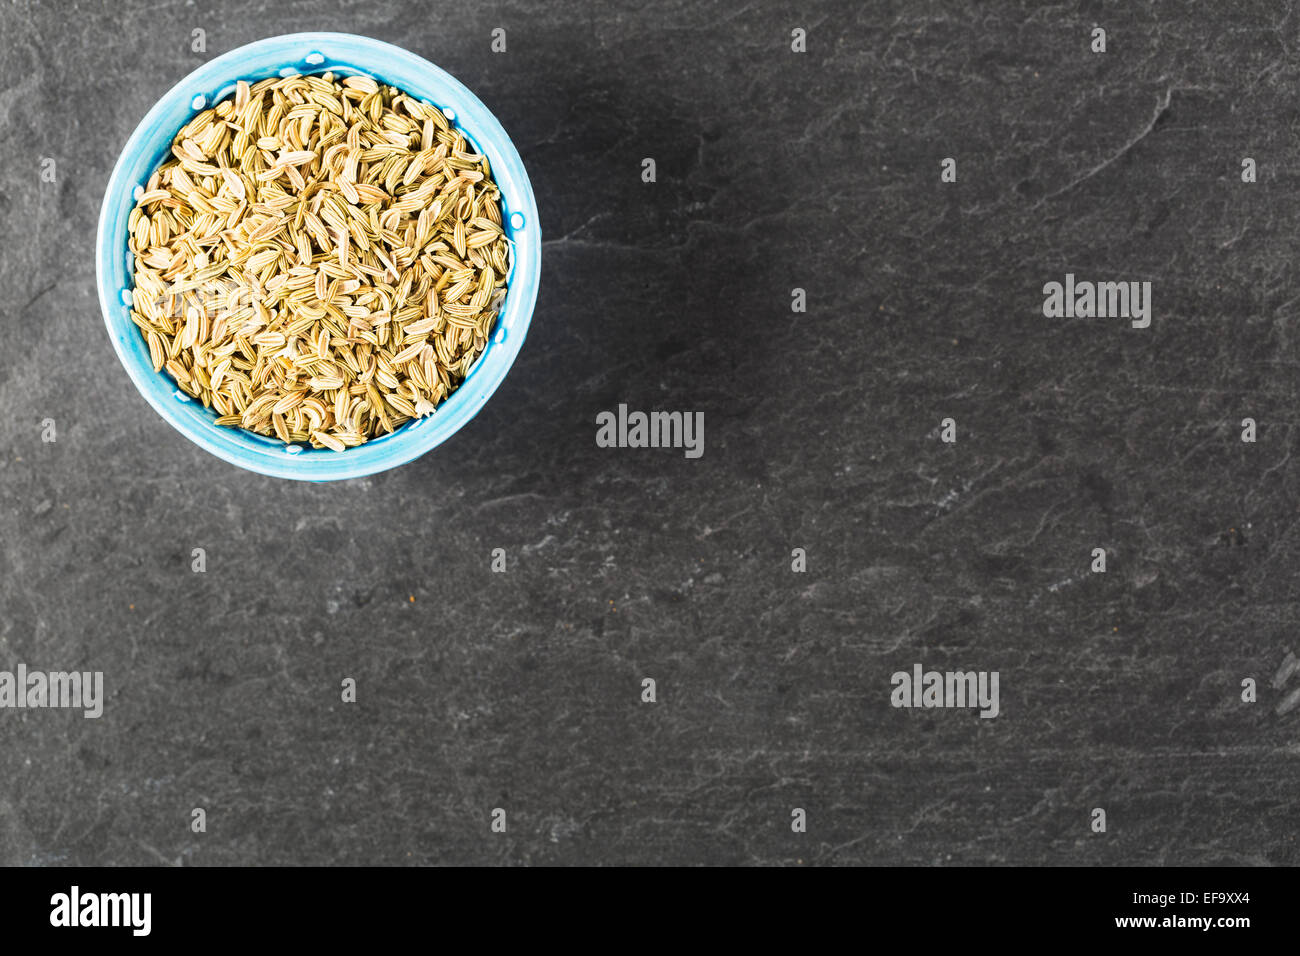 Bowl of fennel seeds on stone surface with copy space. Stock Photo